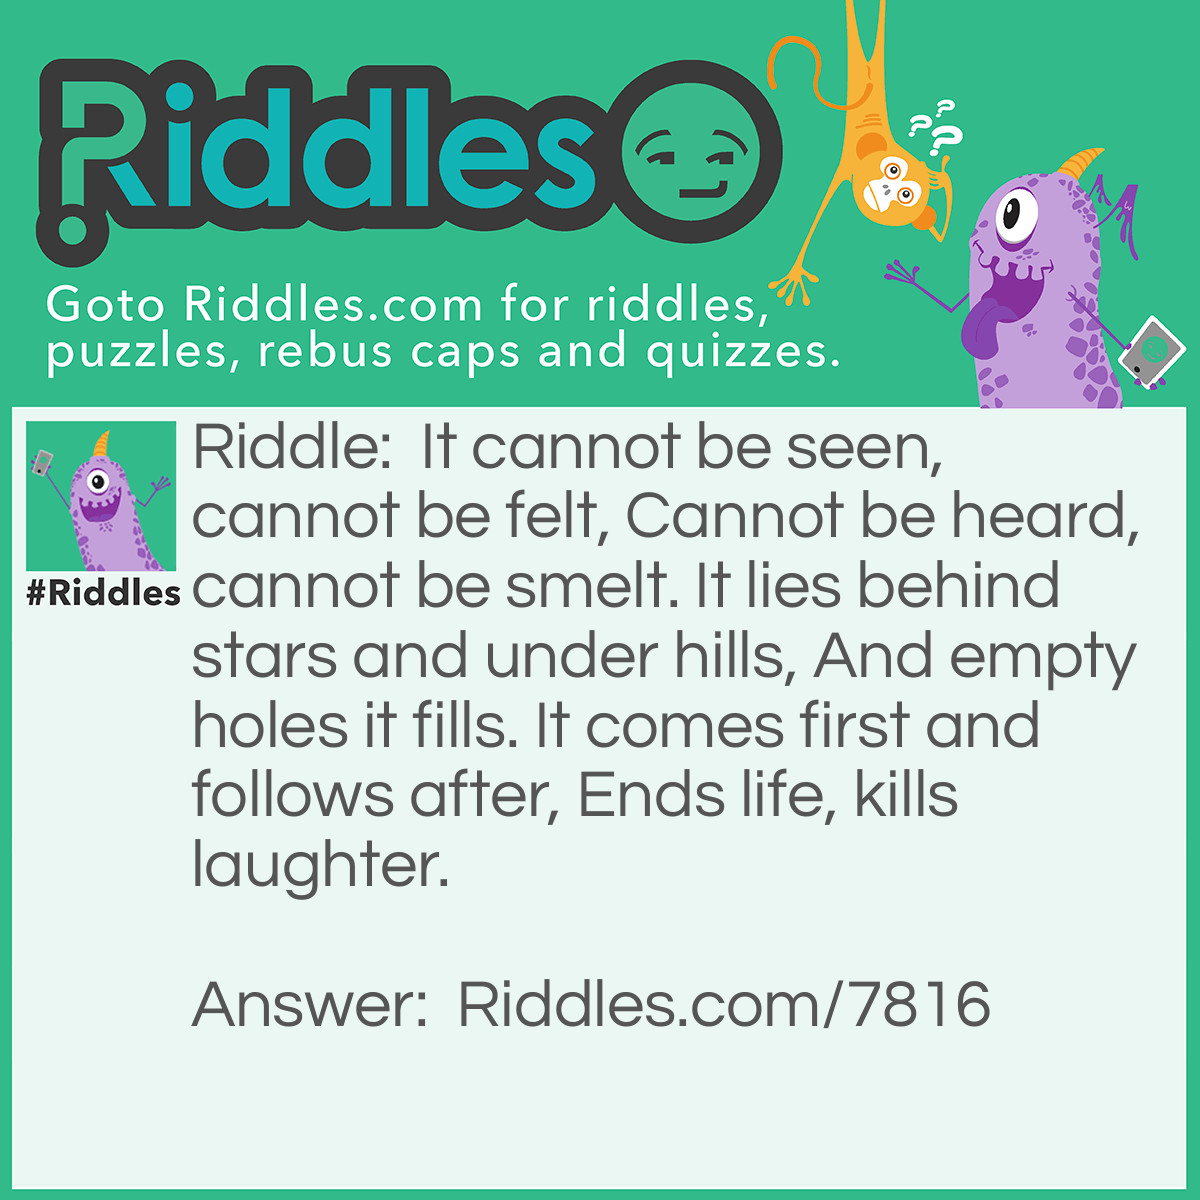 Riddle: It cannot be seen, cannot be felt, Cannot be heard, cannot be smelt. It lies behind stars and under hills, And empty holes it fills. It comes first and follows after, Ends life, kills laughter. Answer: Dark